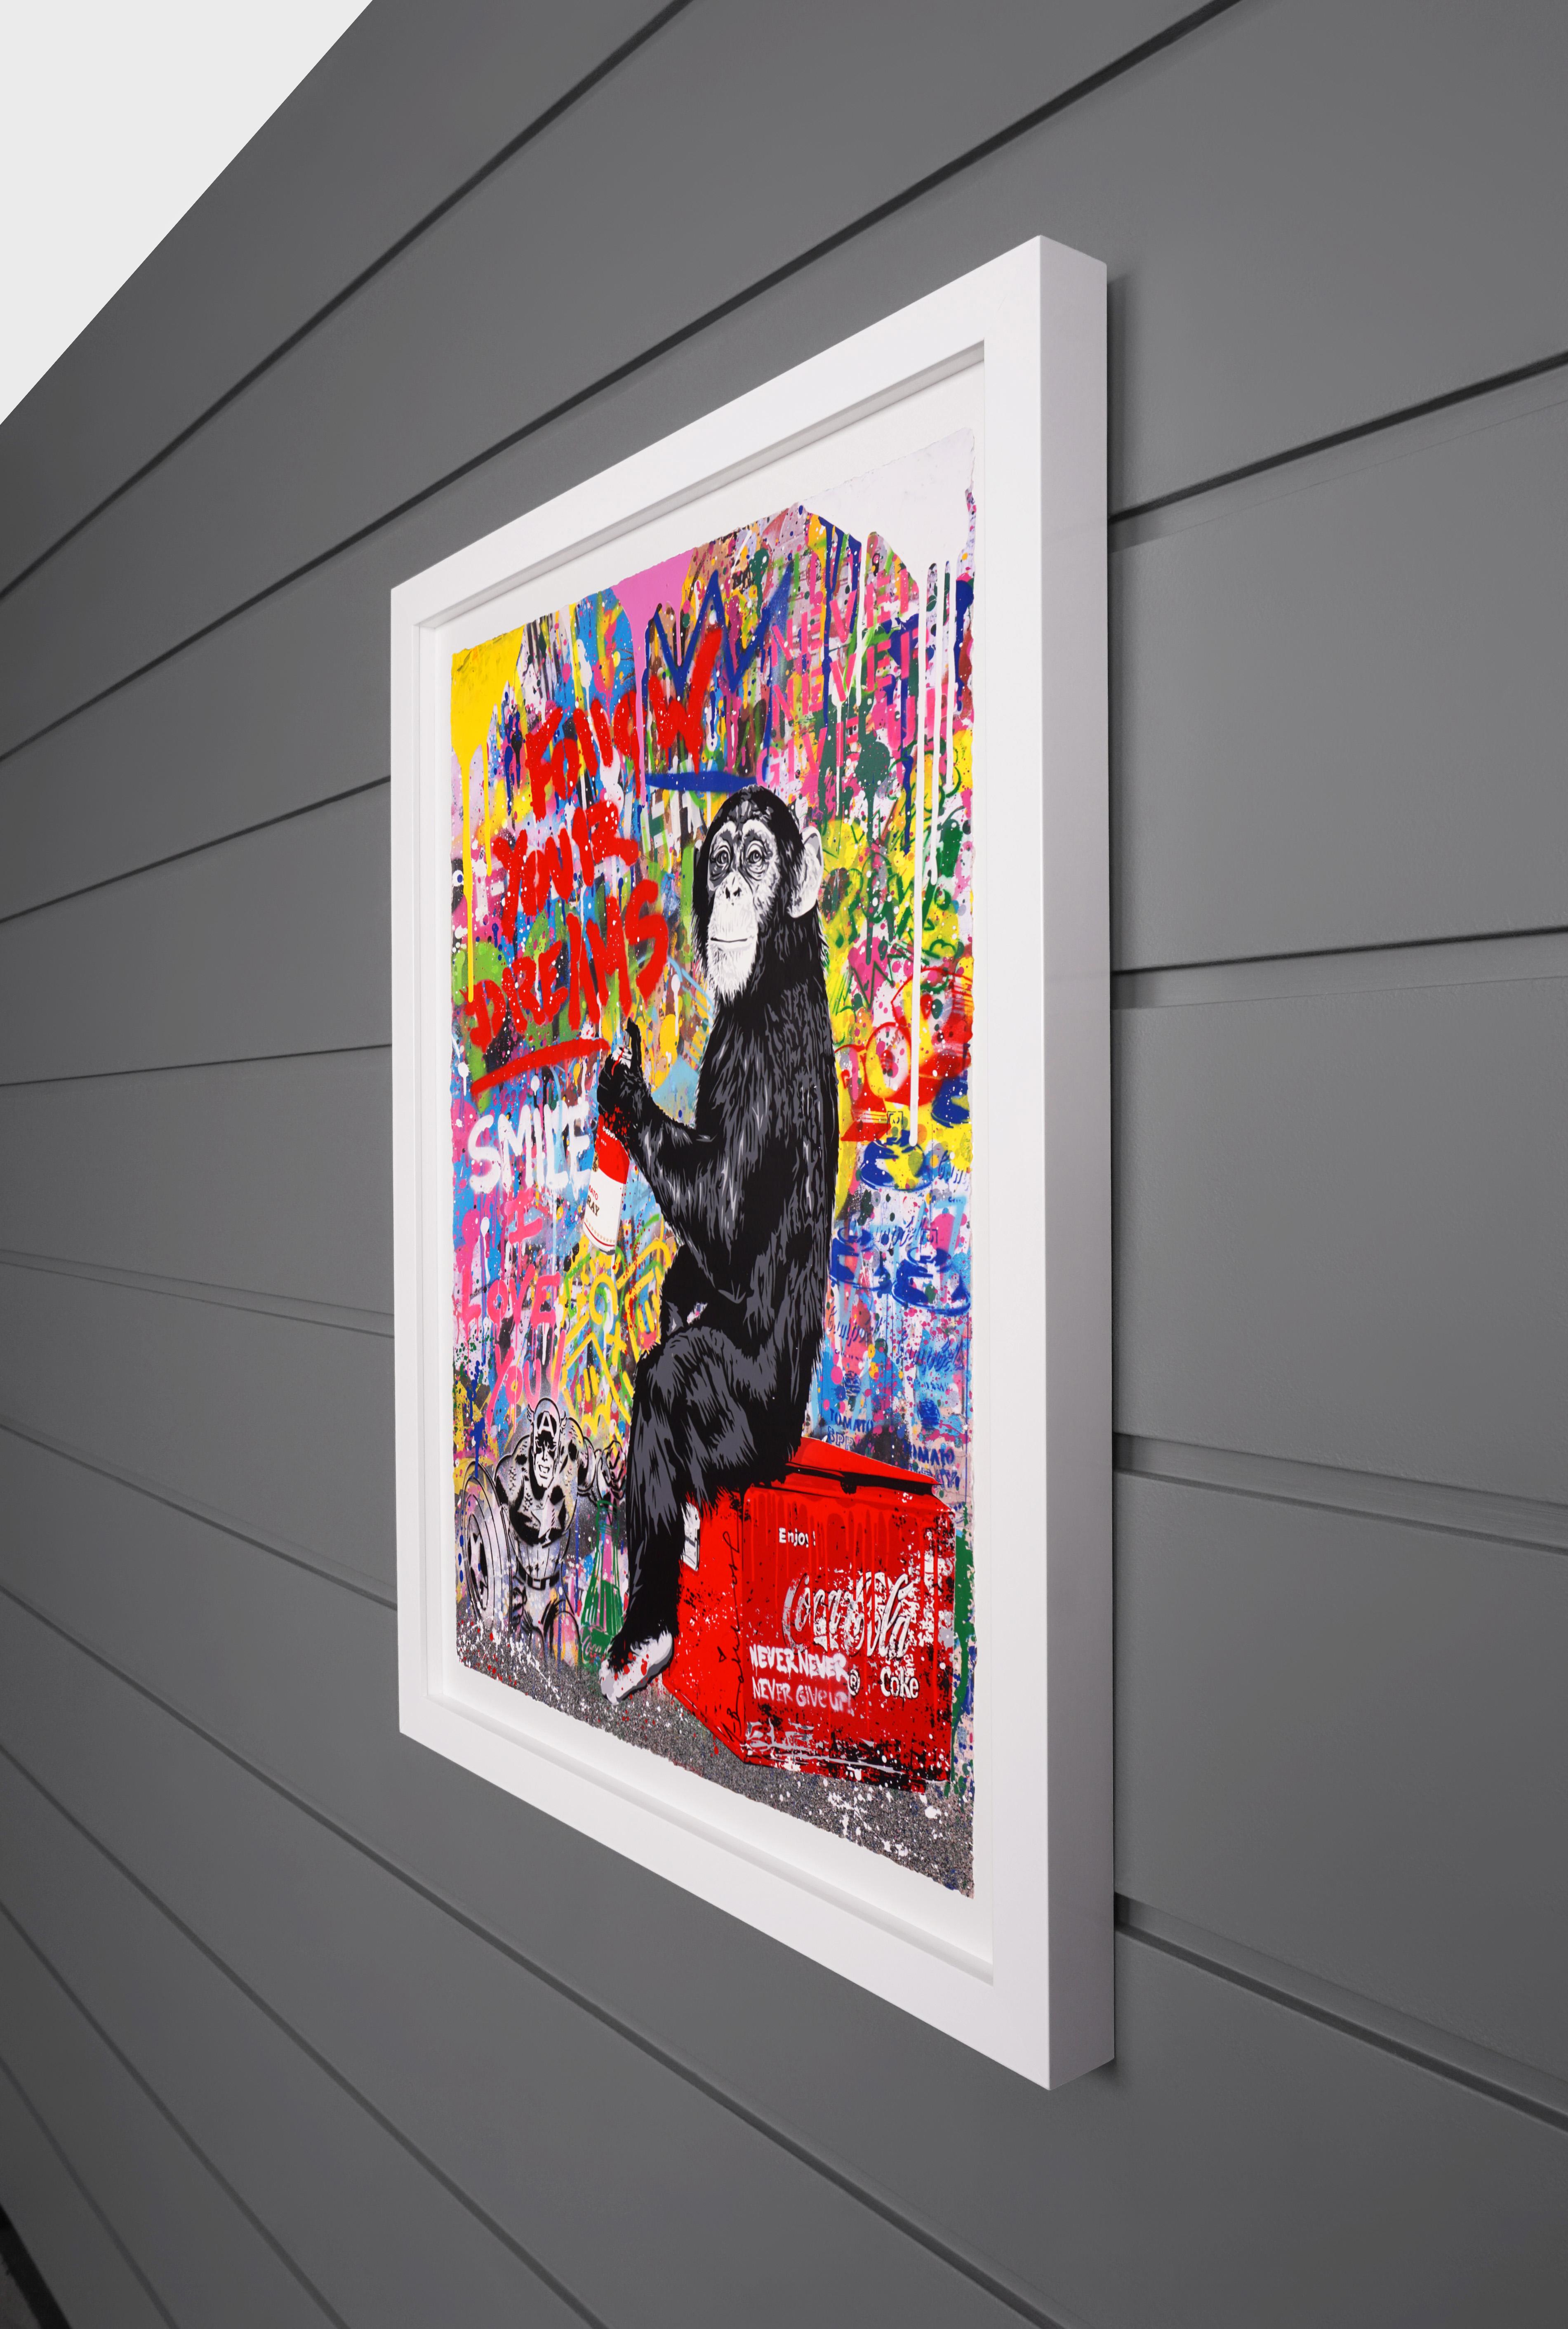 The unique street pop art 'Follow Your Dreams' monkey painting by french contemporary street-artist, Mr. Brainwash was created in 2021. The brightly spray painted, layered, and paint dripped signature style of the contemporary artist has become an